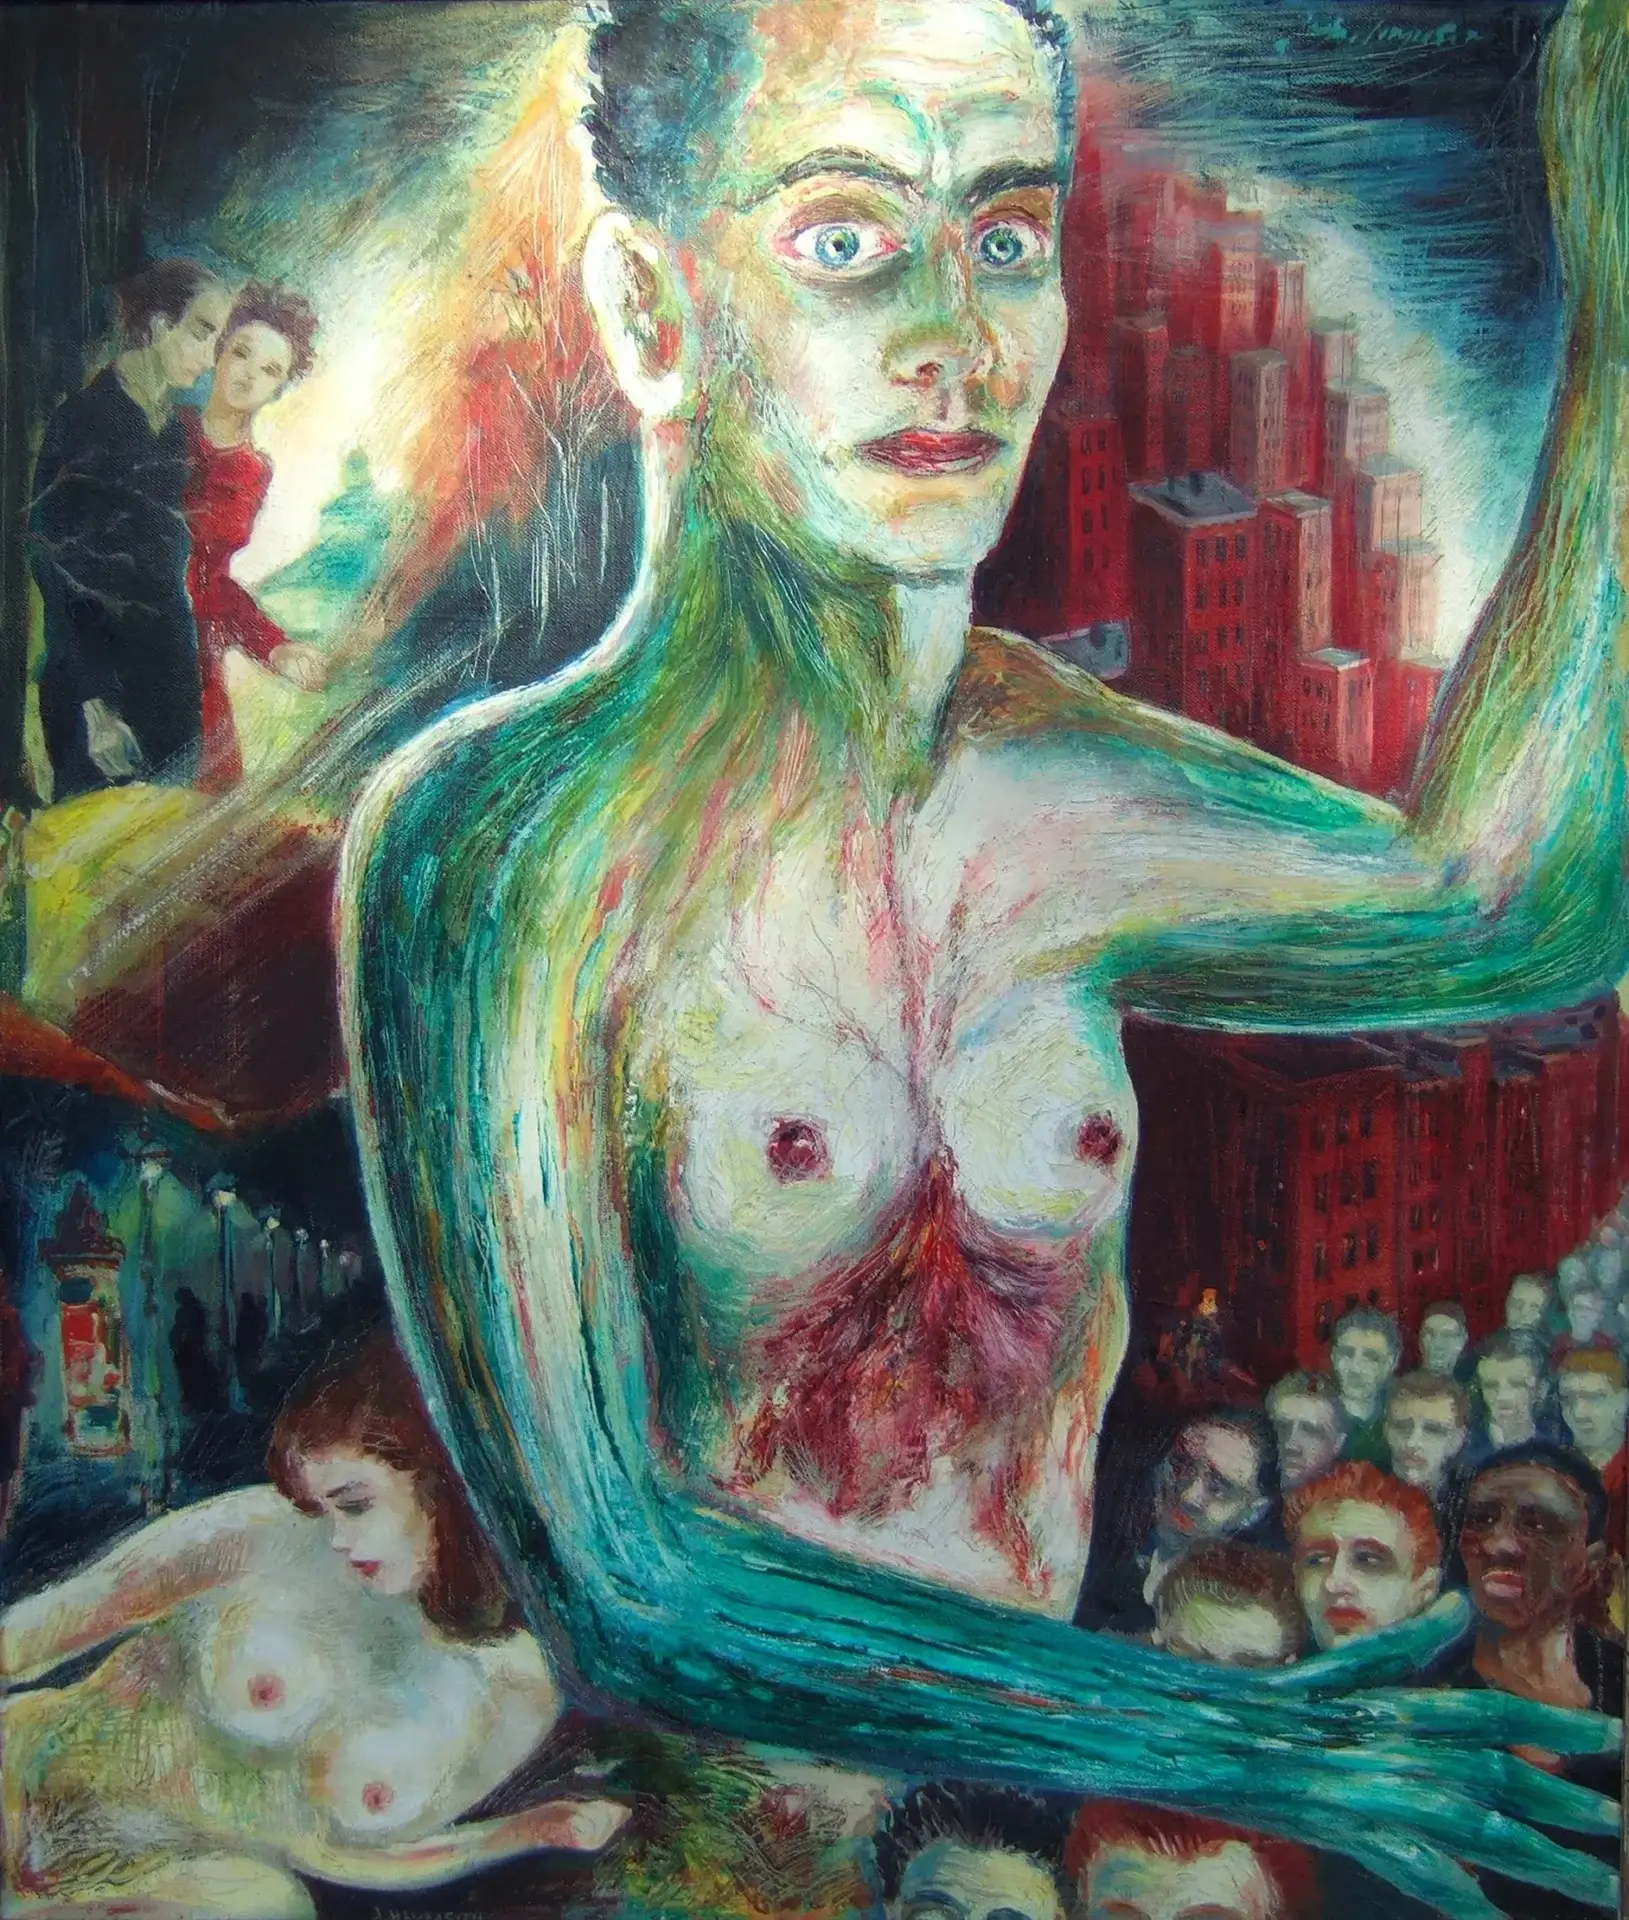 A painting of a woman with green skin and red hair.